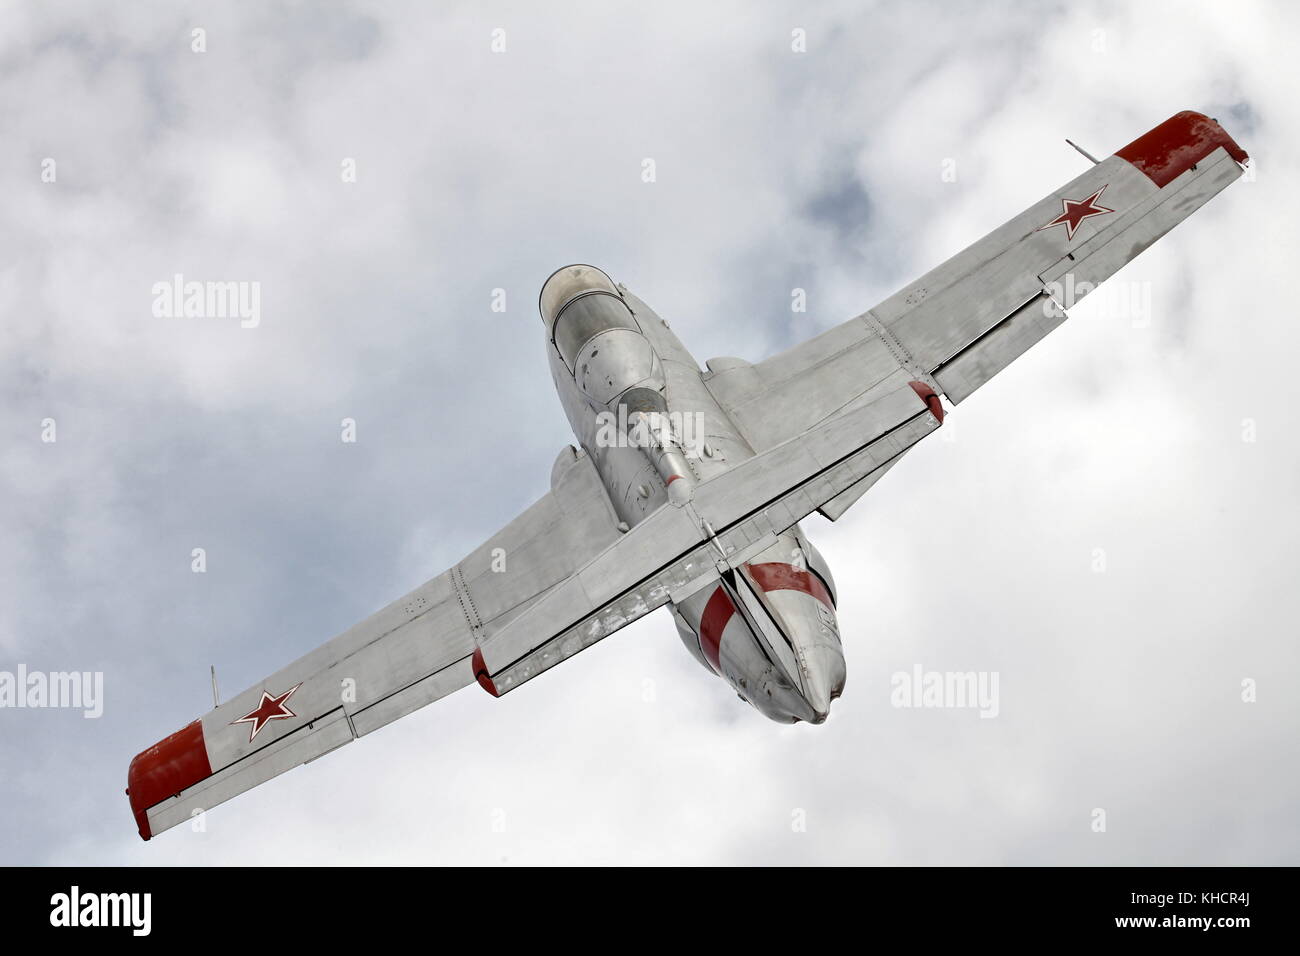 Czechoslovak training  jet  aircraft Aero L-29 Delfin rear view from above Stock Photo